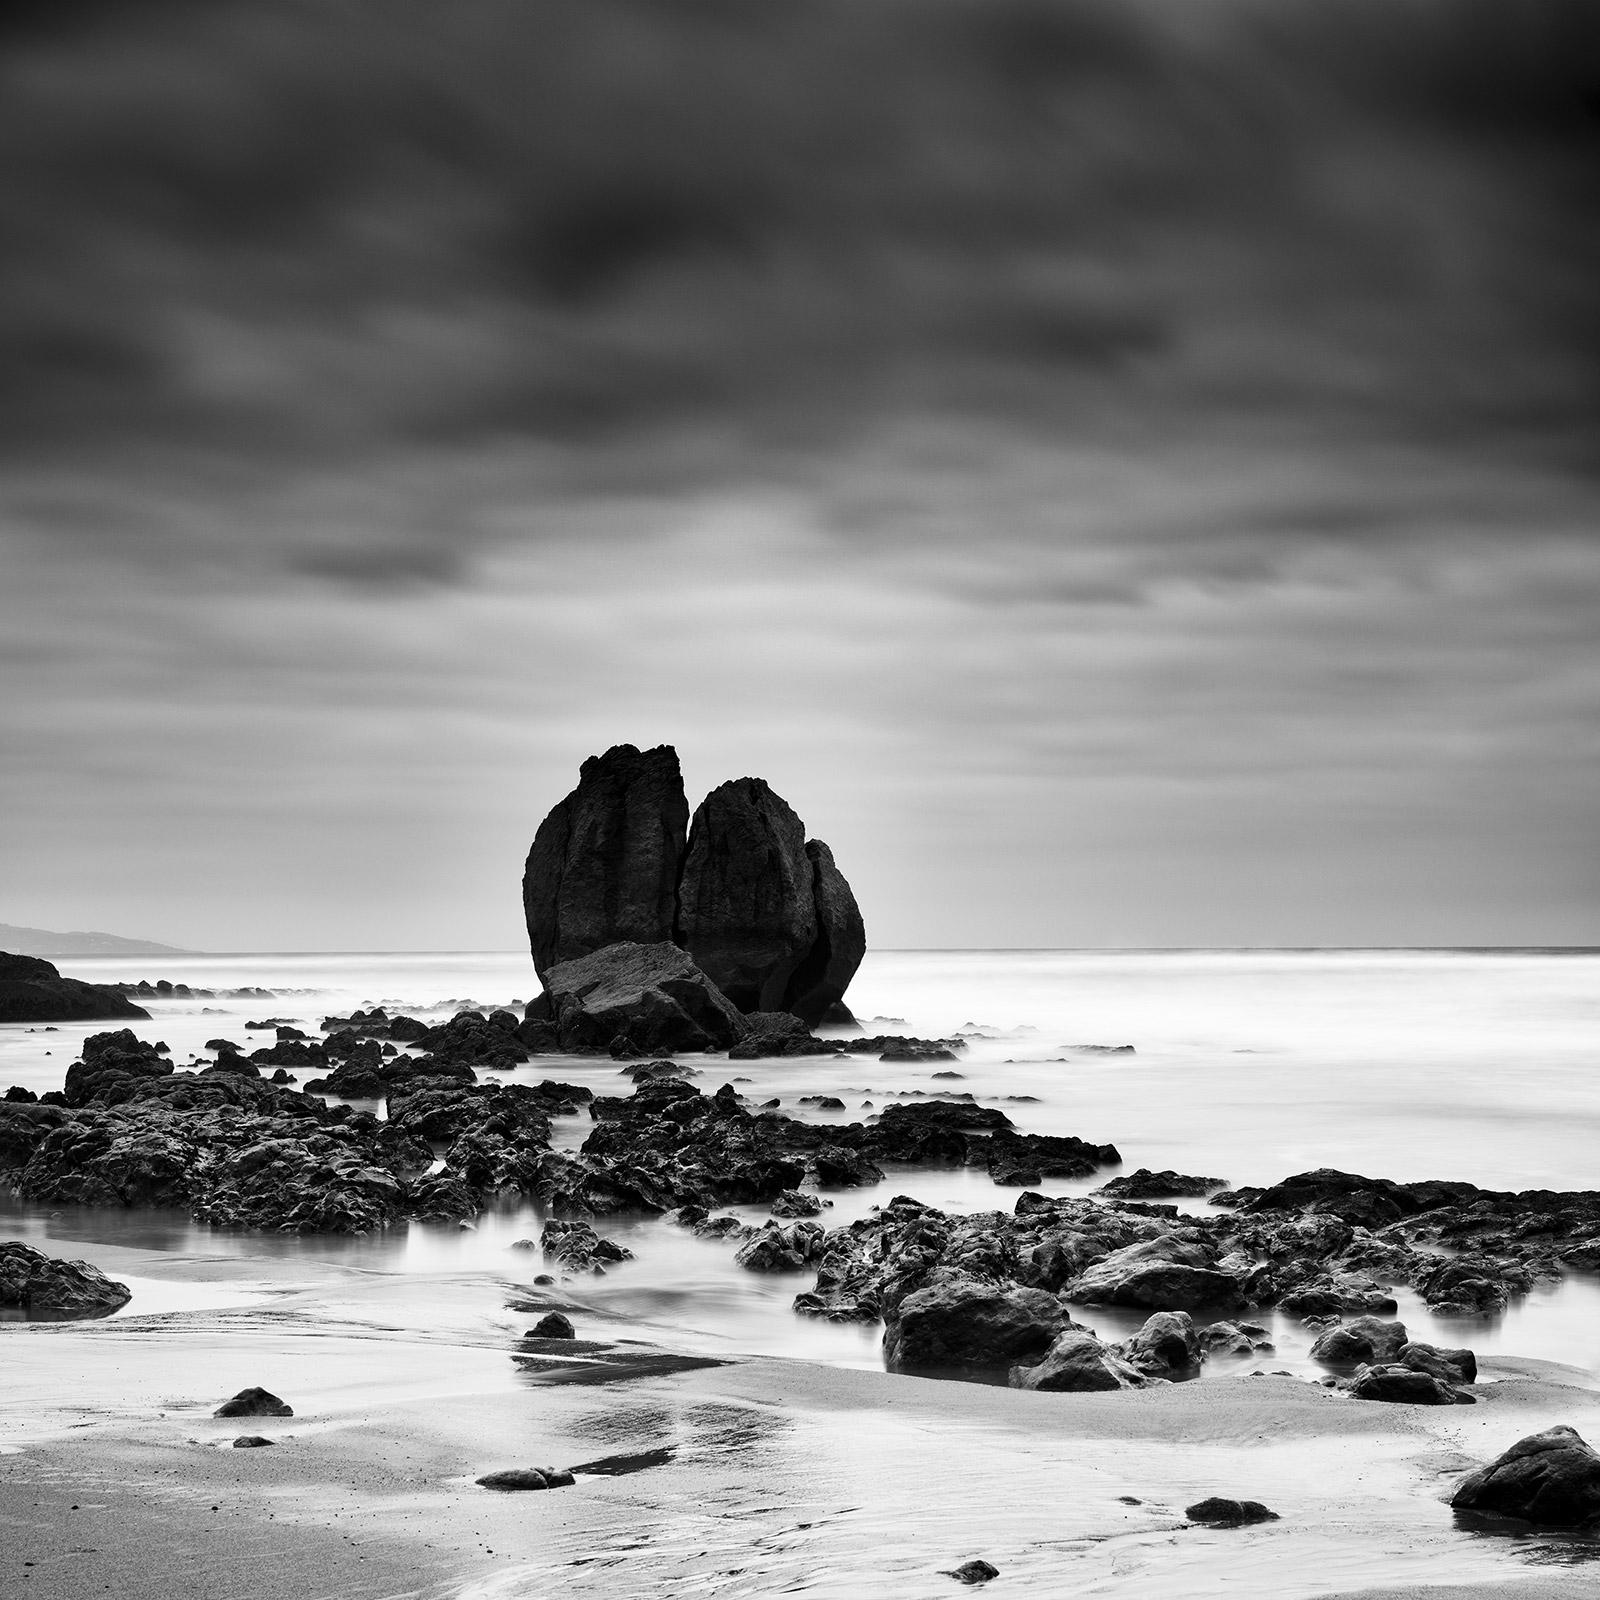 Gerald Berghammer Black and White Photograph - Rocks on the Shore, sandy beach, black and white fine art photography, landscape